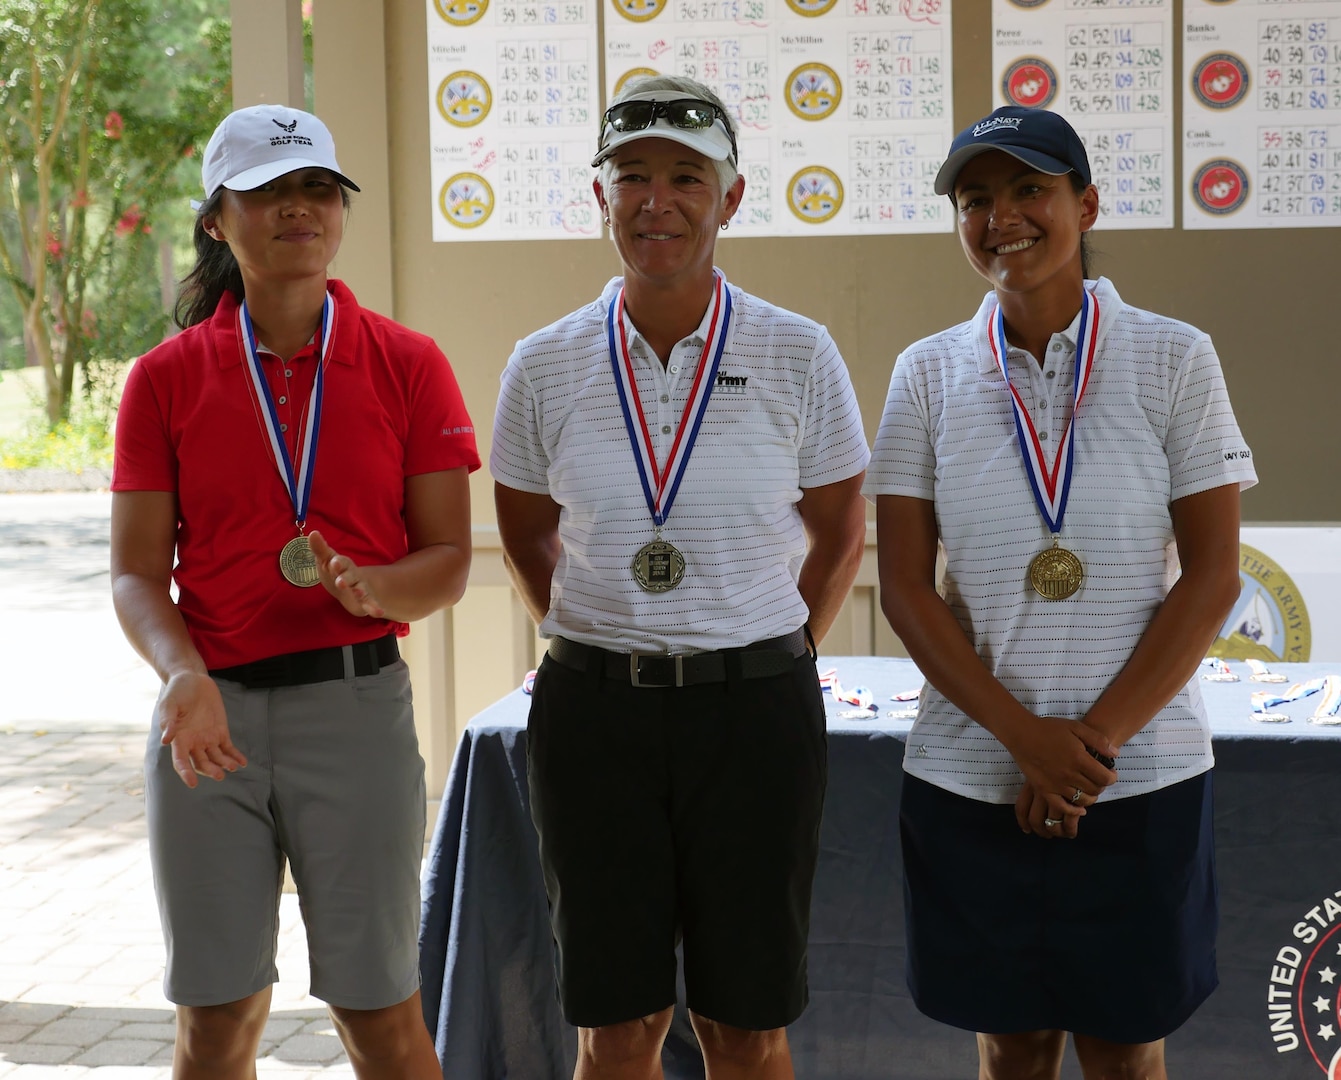 Top women golfers of the 2016 Armed Forces Golf Championship at Fort Jackson, S.C. 20-23 August.  From left to right:  Bronze medalist Air Force 1st Lt Deborah Kim of Wright-Patterson AFB, Ohio; Silver medalist Army Col. Shauna Synder of Falls Church, Va.; and 2016 Champion, Navy Petty Officer 3rd Class Maggie Ramirez of NAS Coronado, Calif.